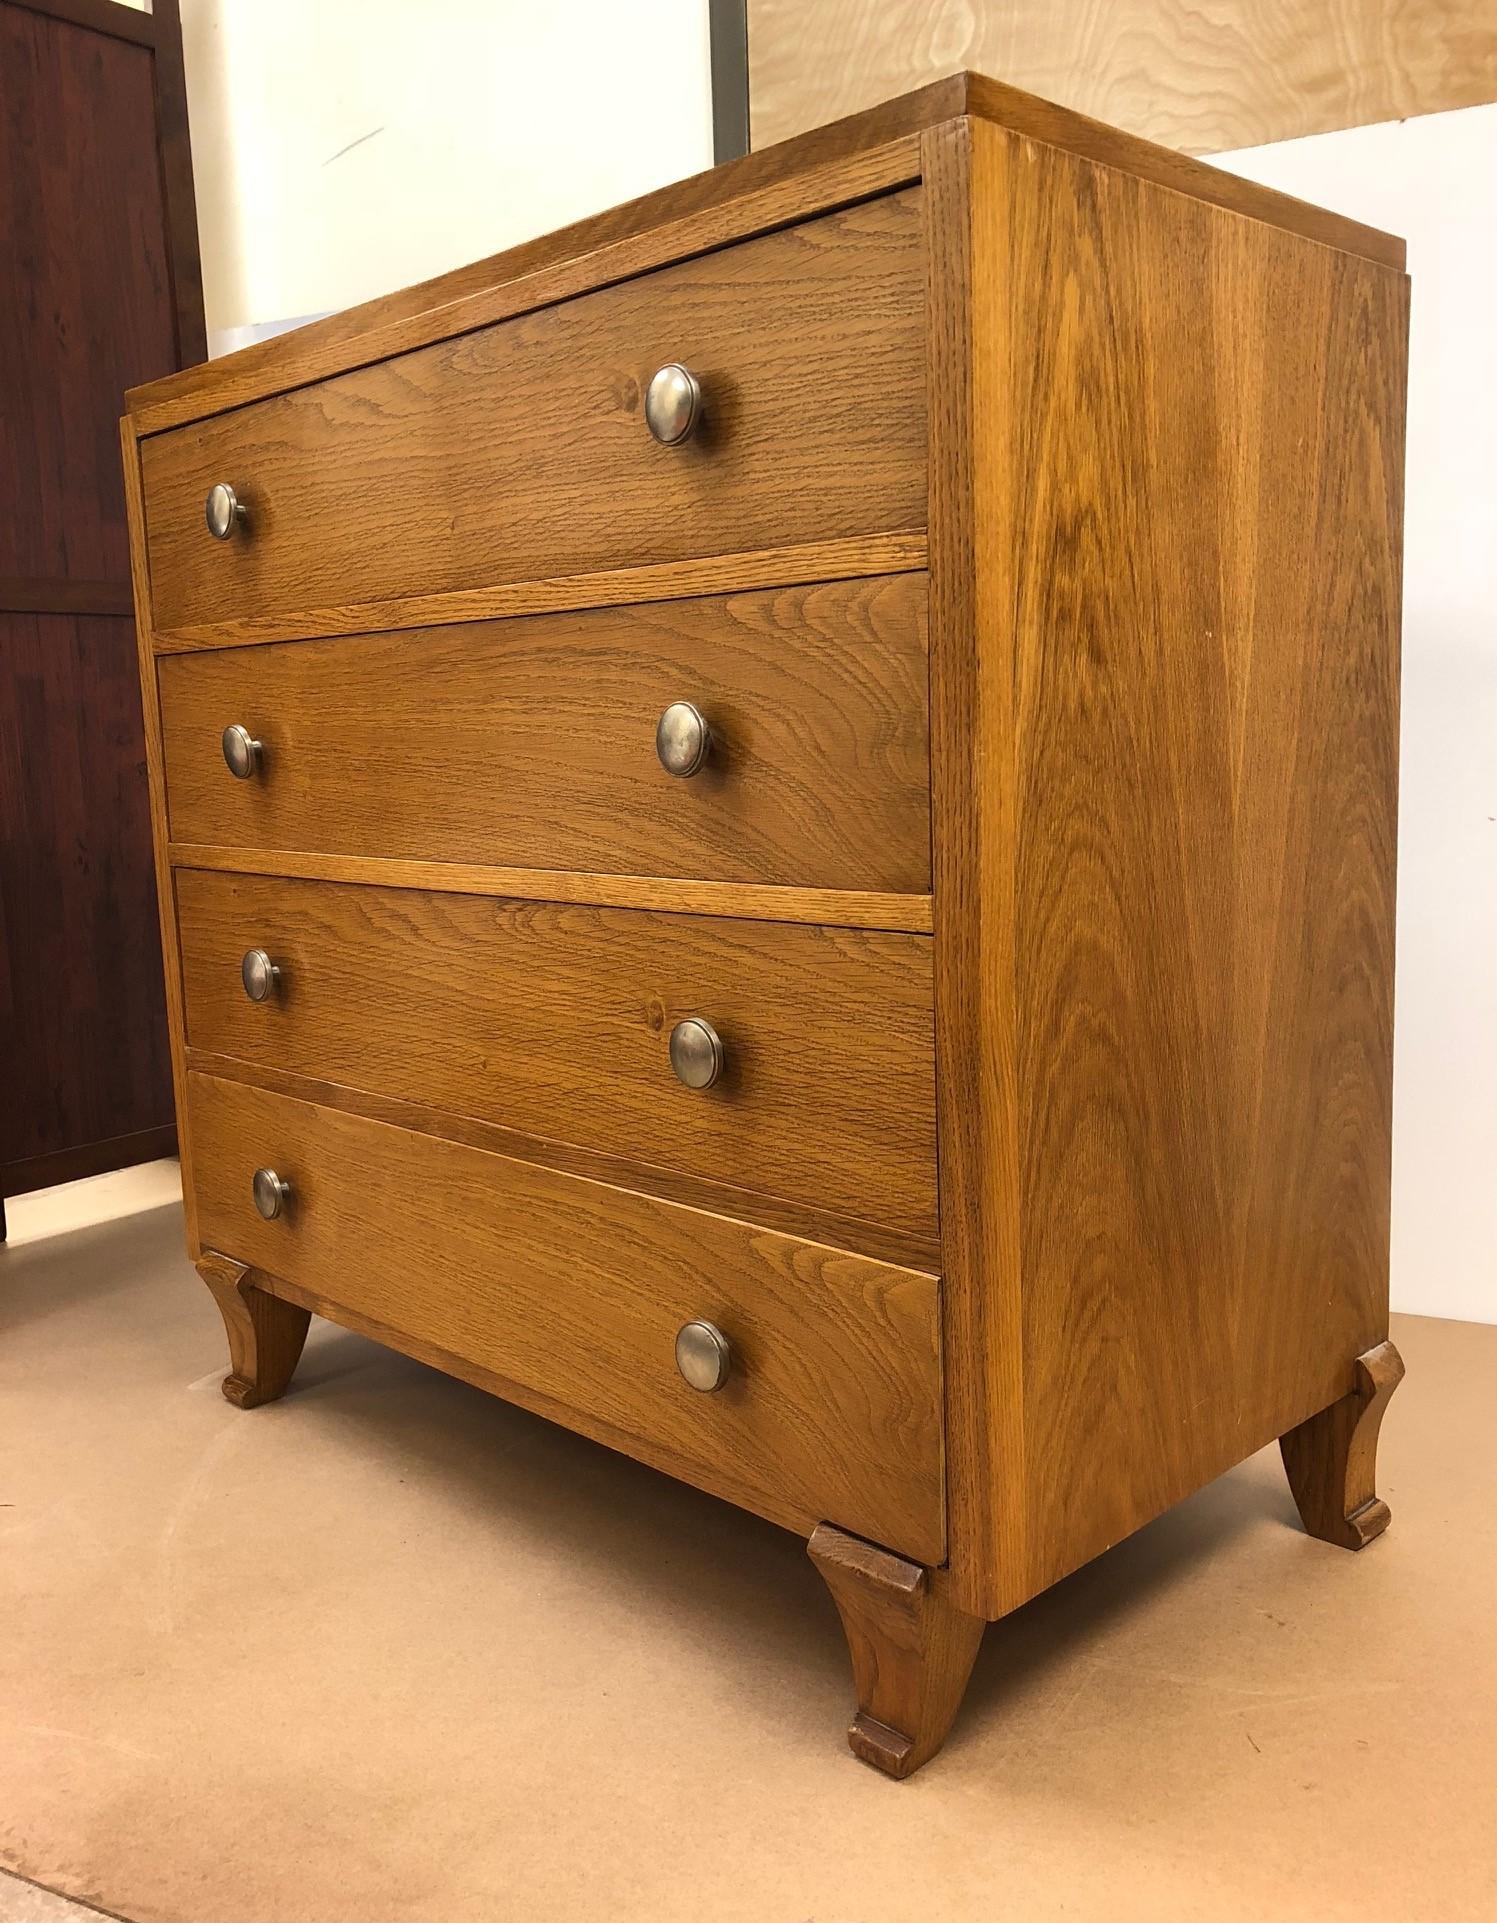 1940s French sycamore dresser attributed to Maurice Rinck. In good original condition. Maurice Rinck is a well-known Art Deco cabinet maker who was based in Paris, Faubourg Saint Antoine.